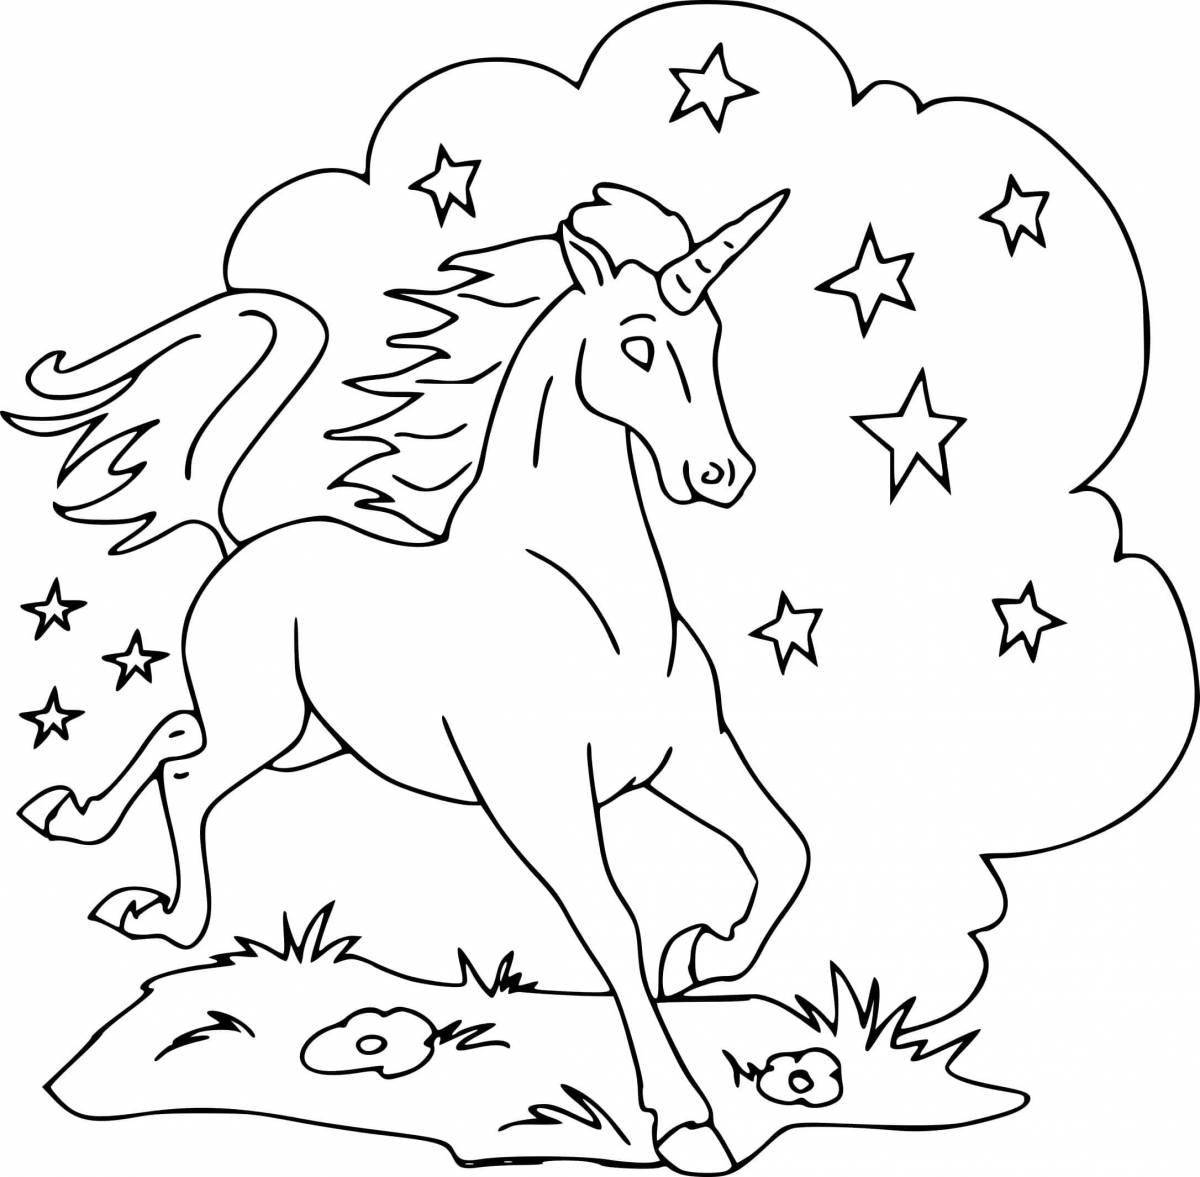 Majestic coloring drawing of a unicorn